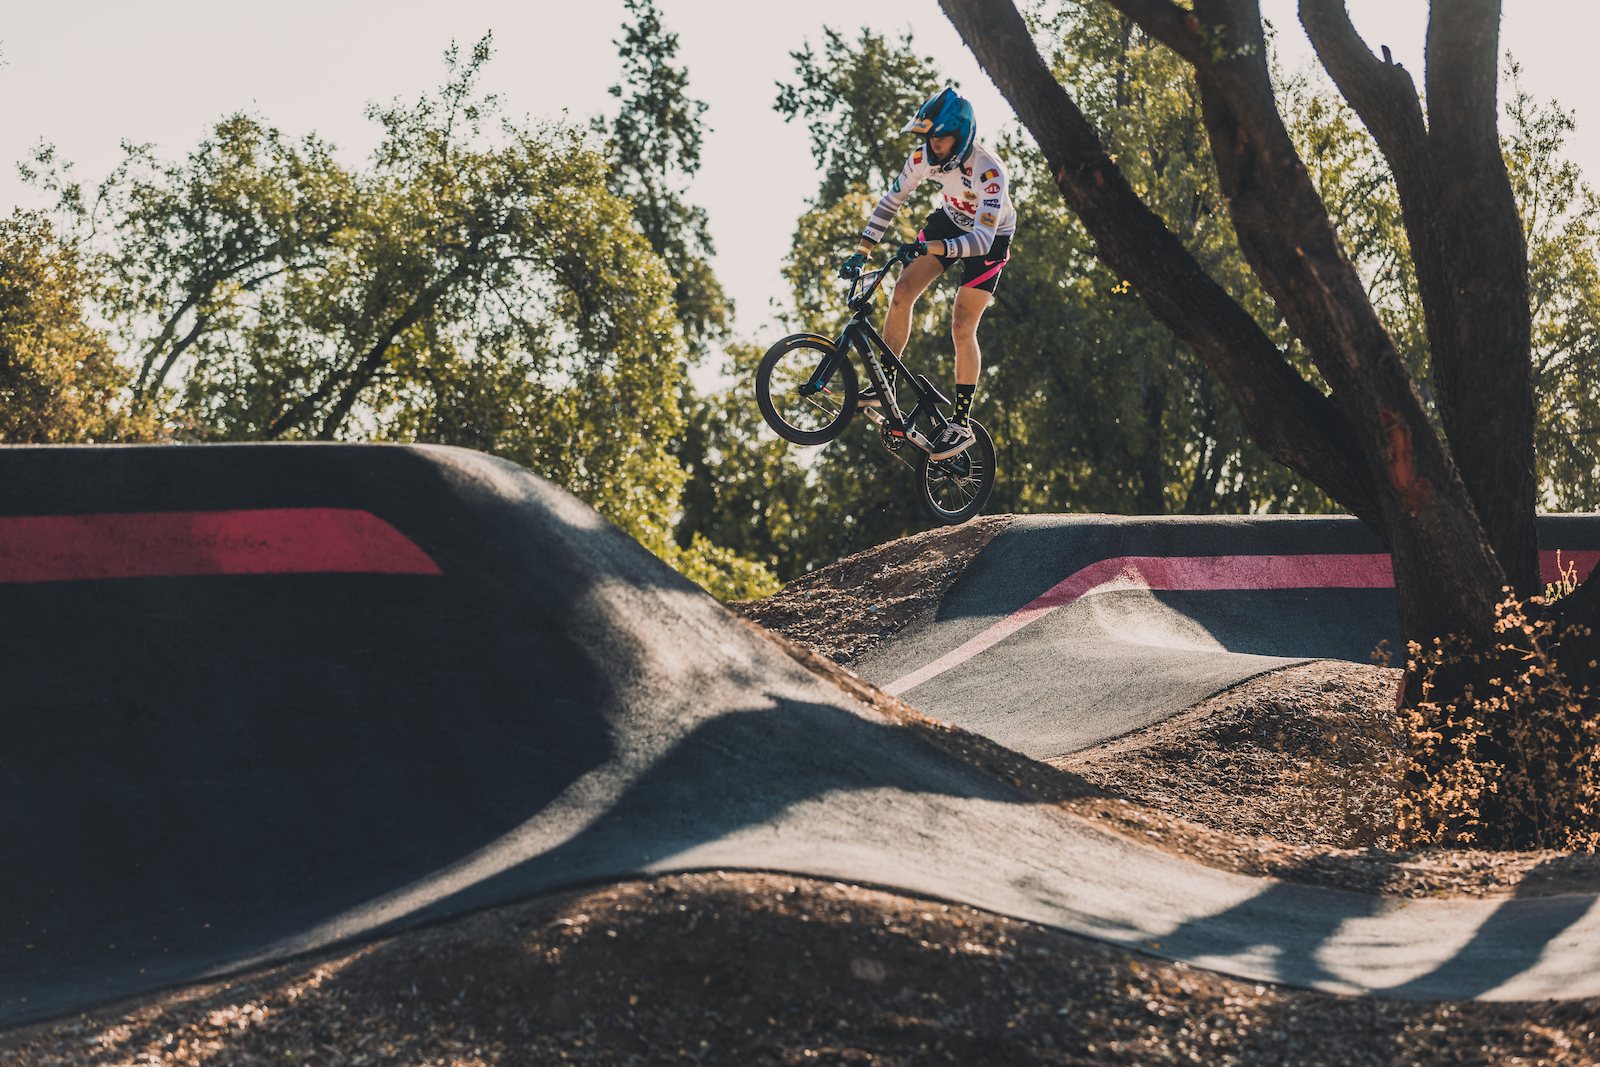 The course was tighter and steeper than previous years and most opted for BMX over MTB. Still there were plenty of doubles and triples to be found.